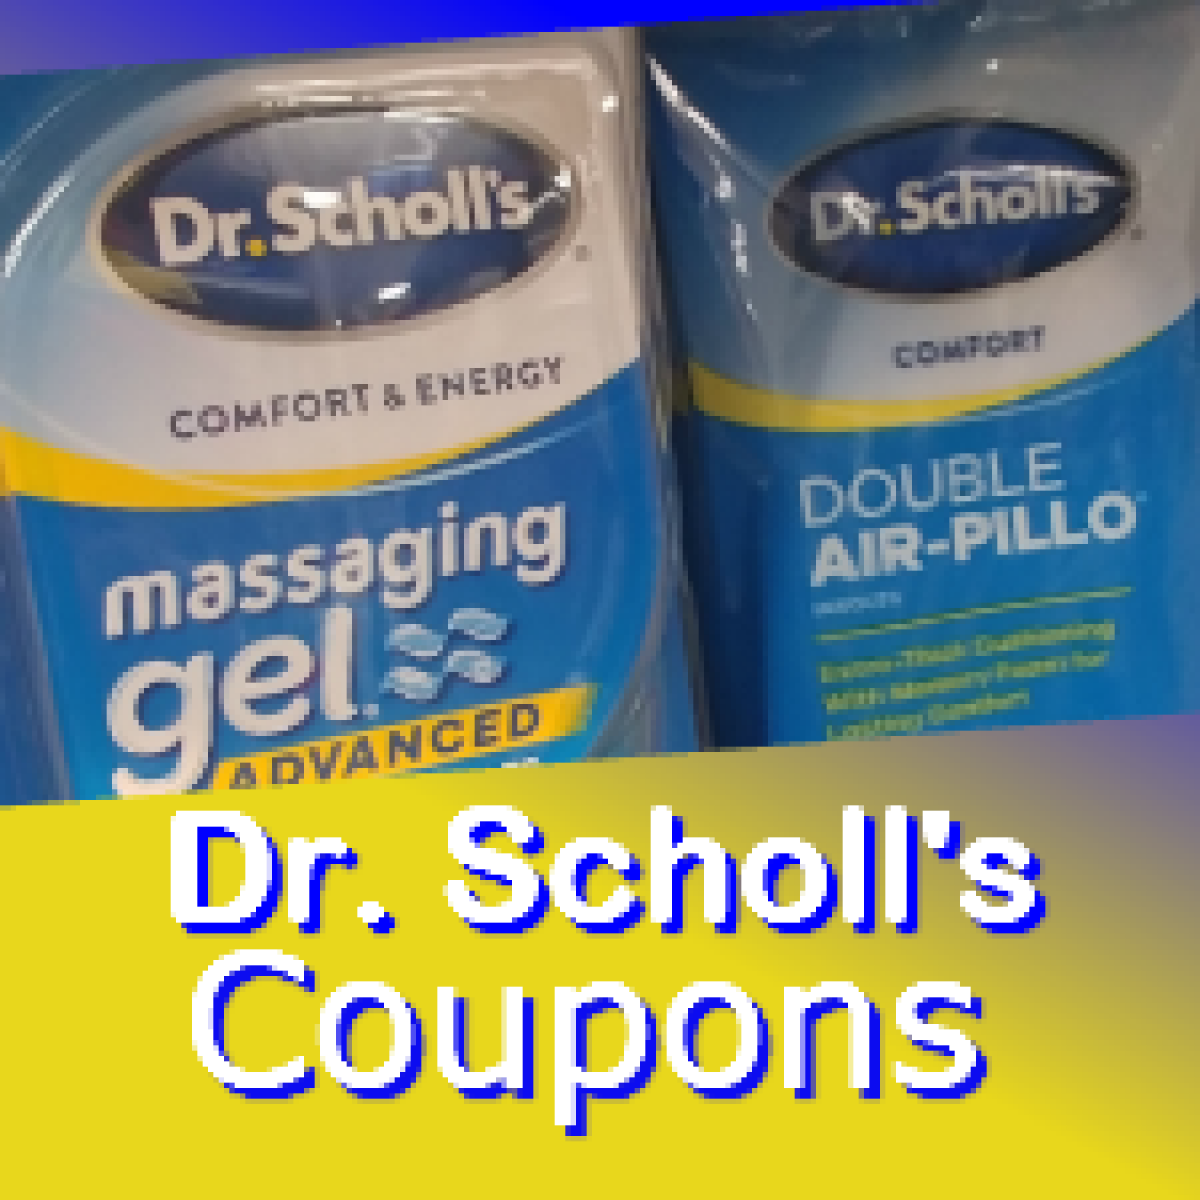 dr scholl's custom fit orthotics coupon